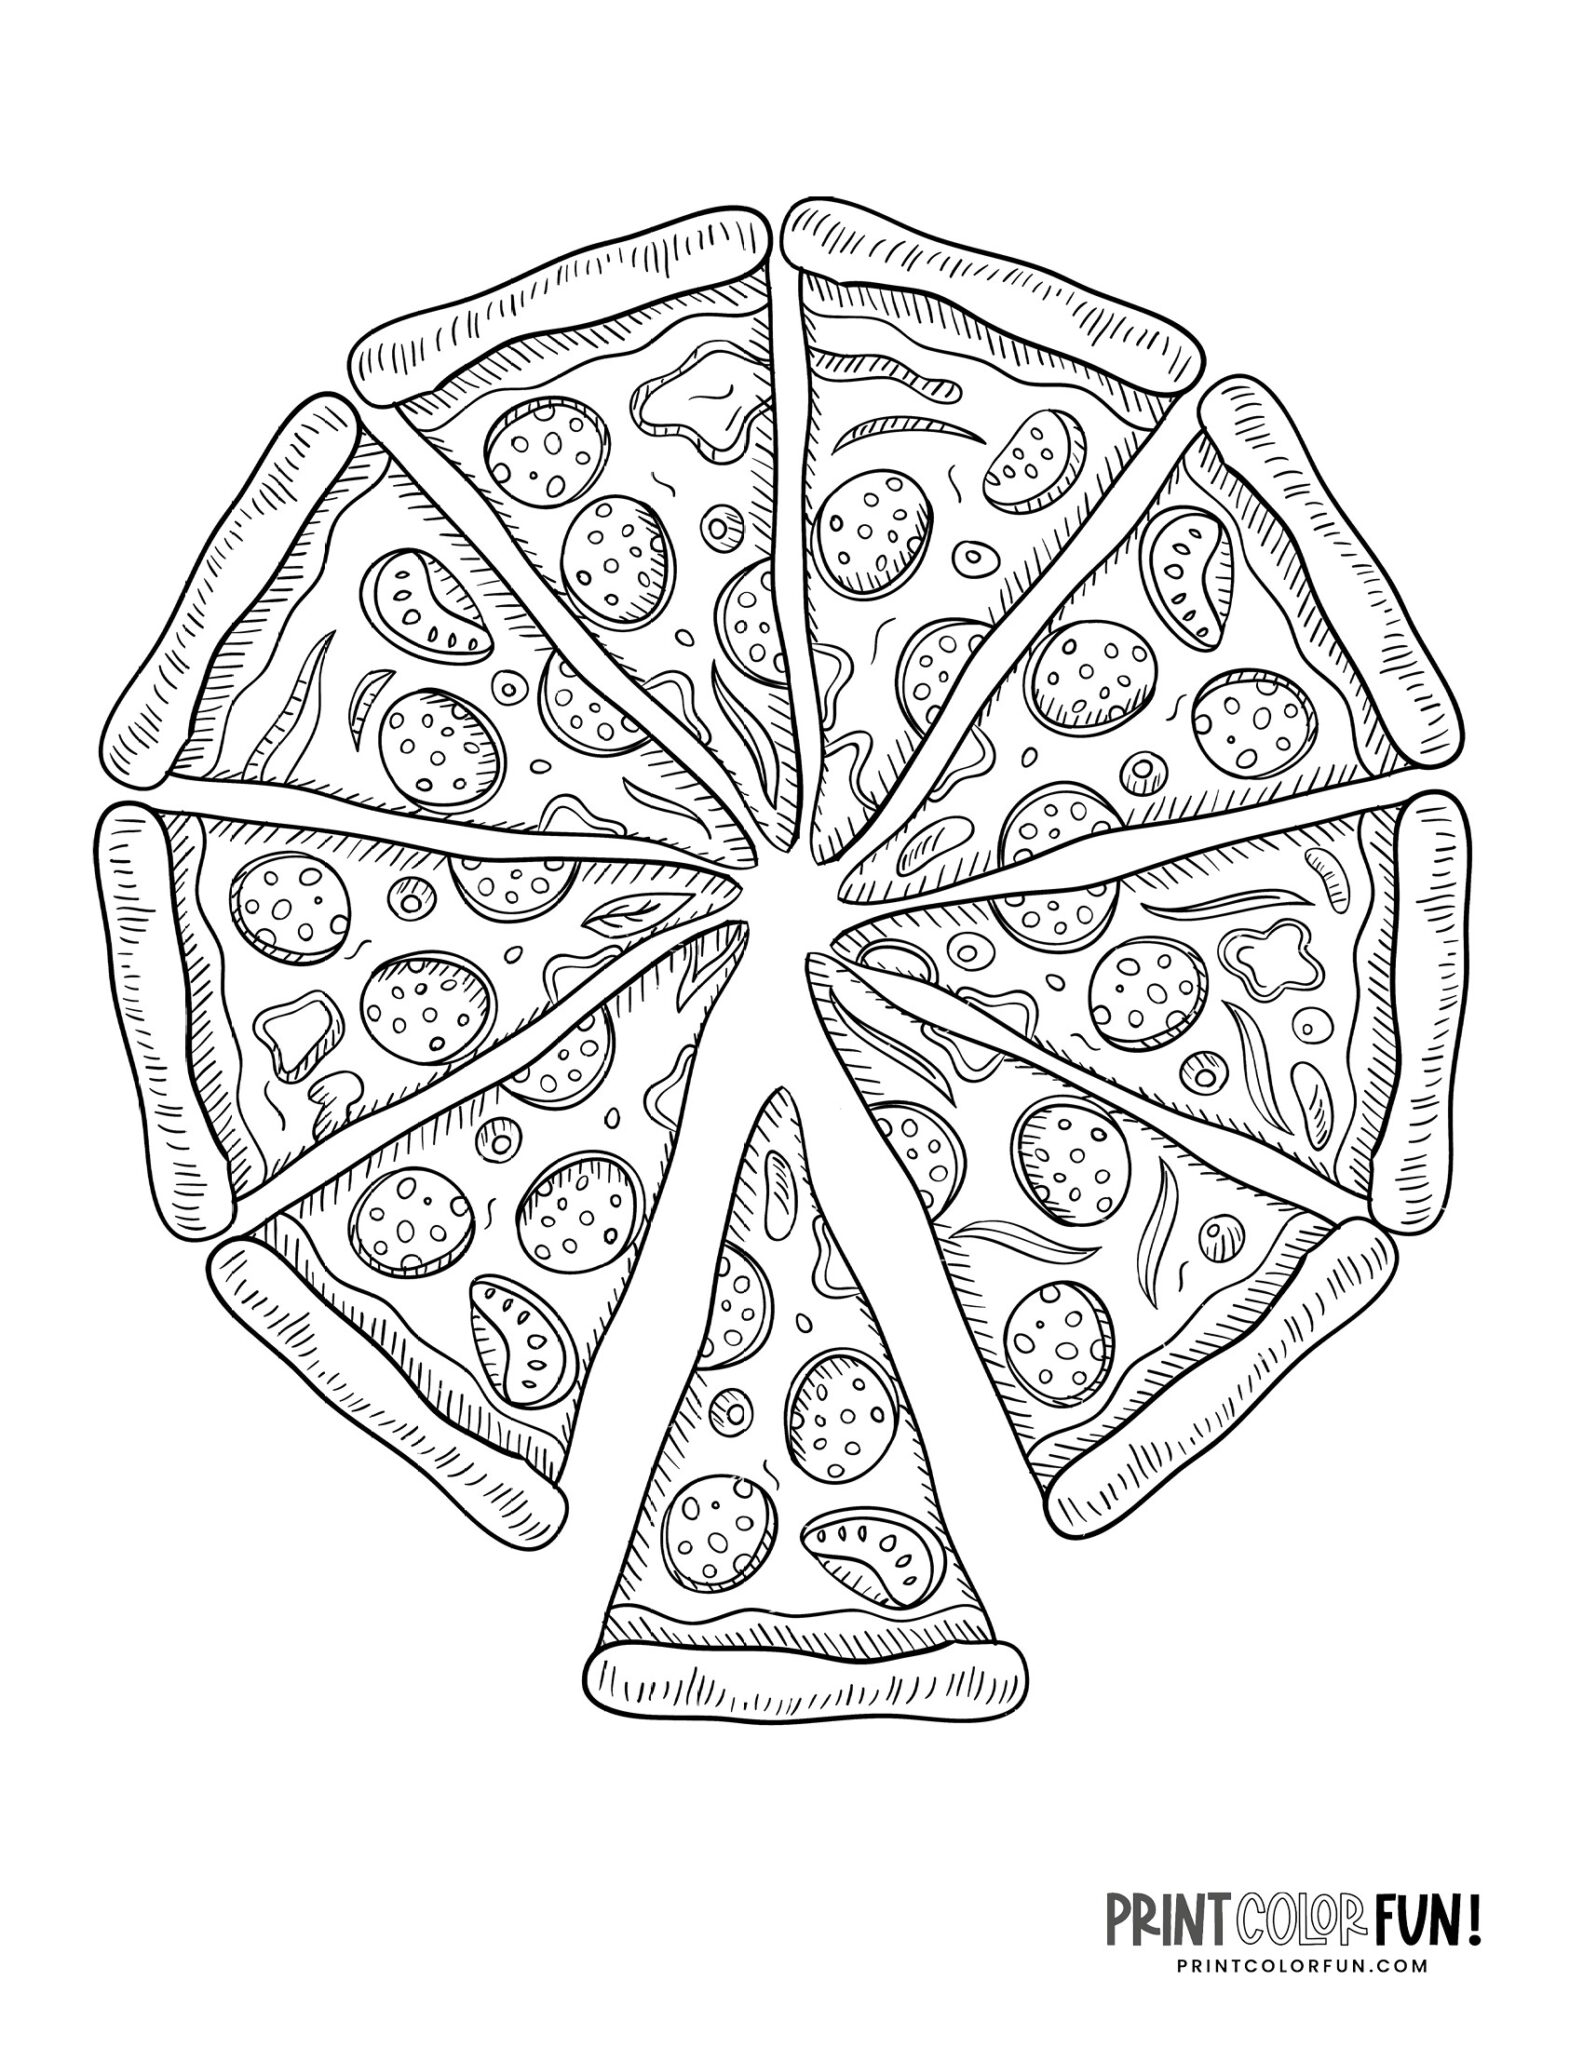 Printable Pizza Faces To Color